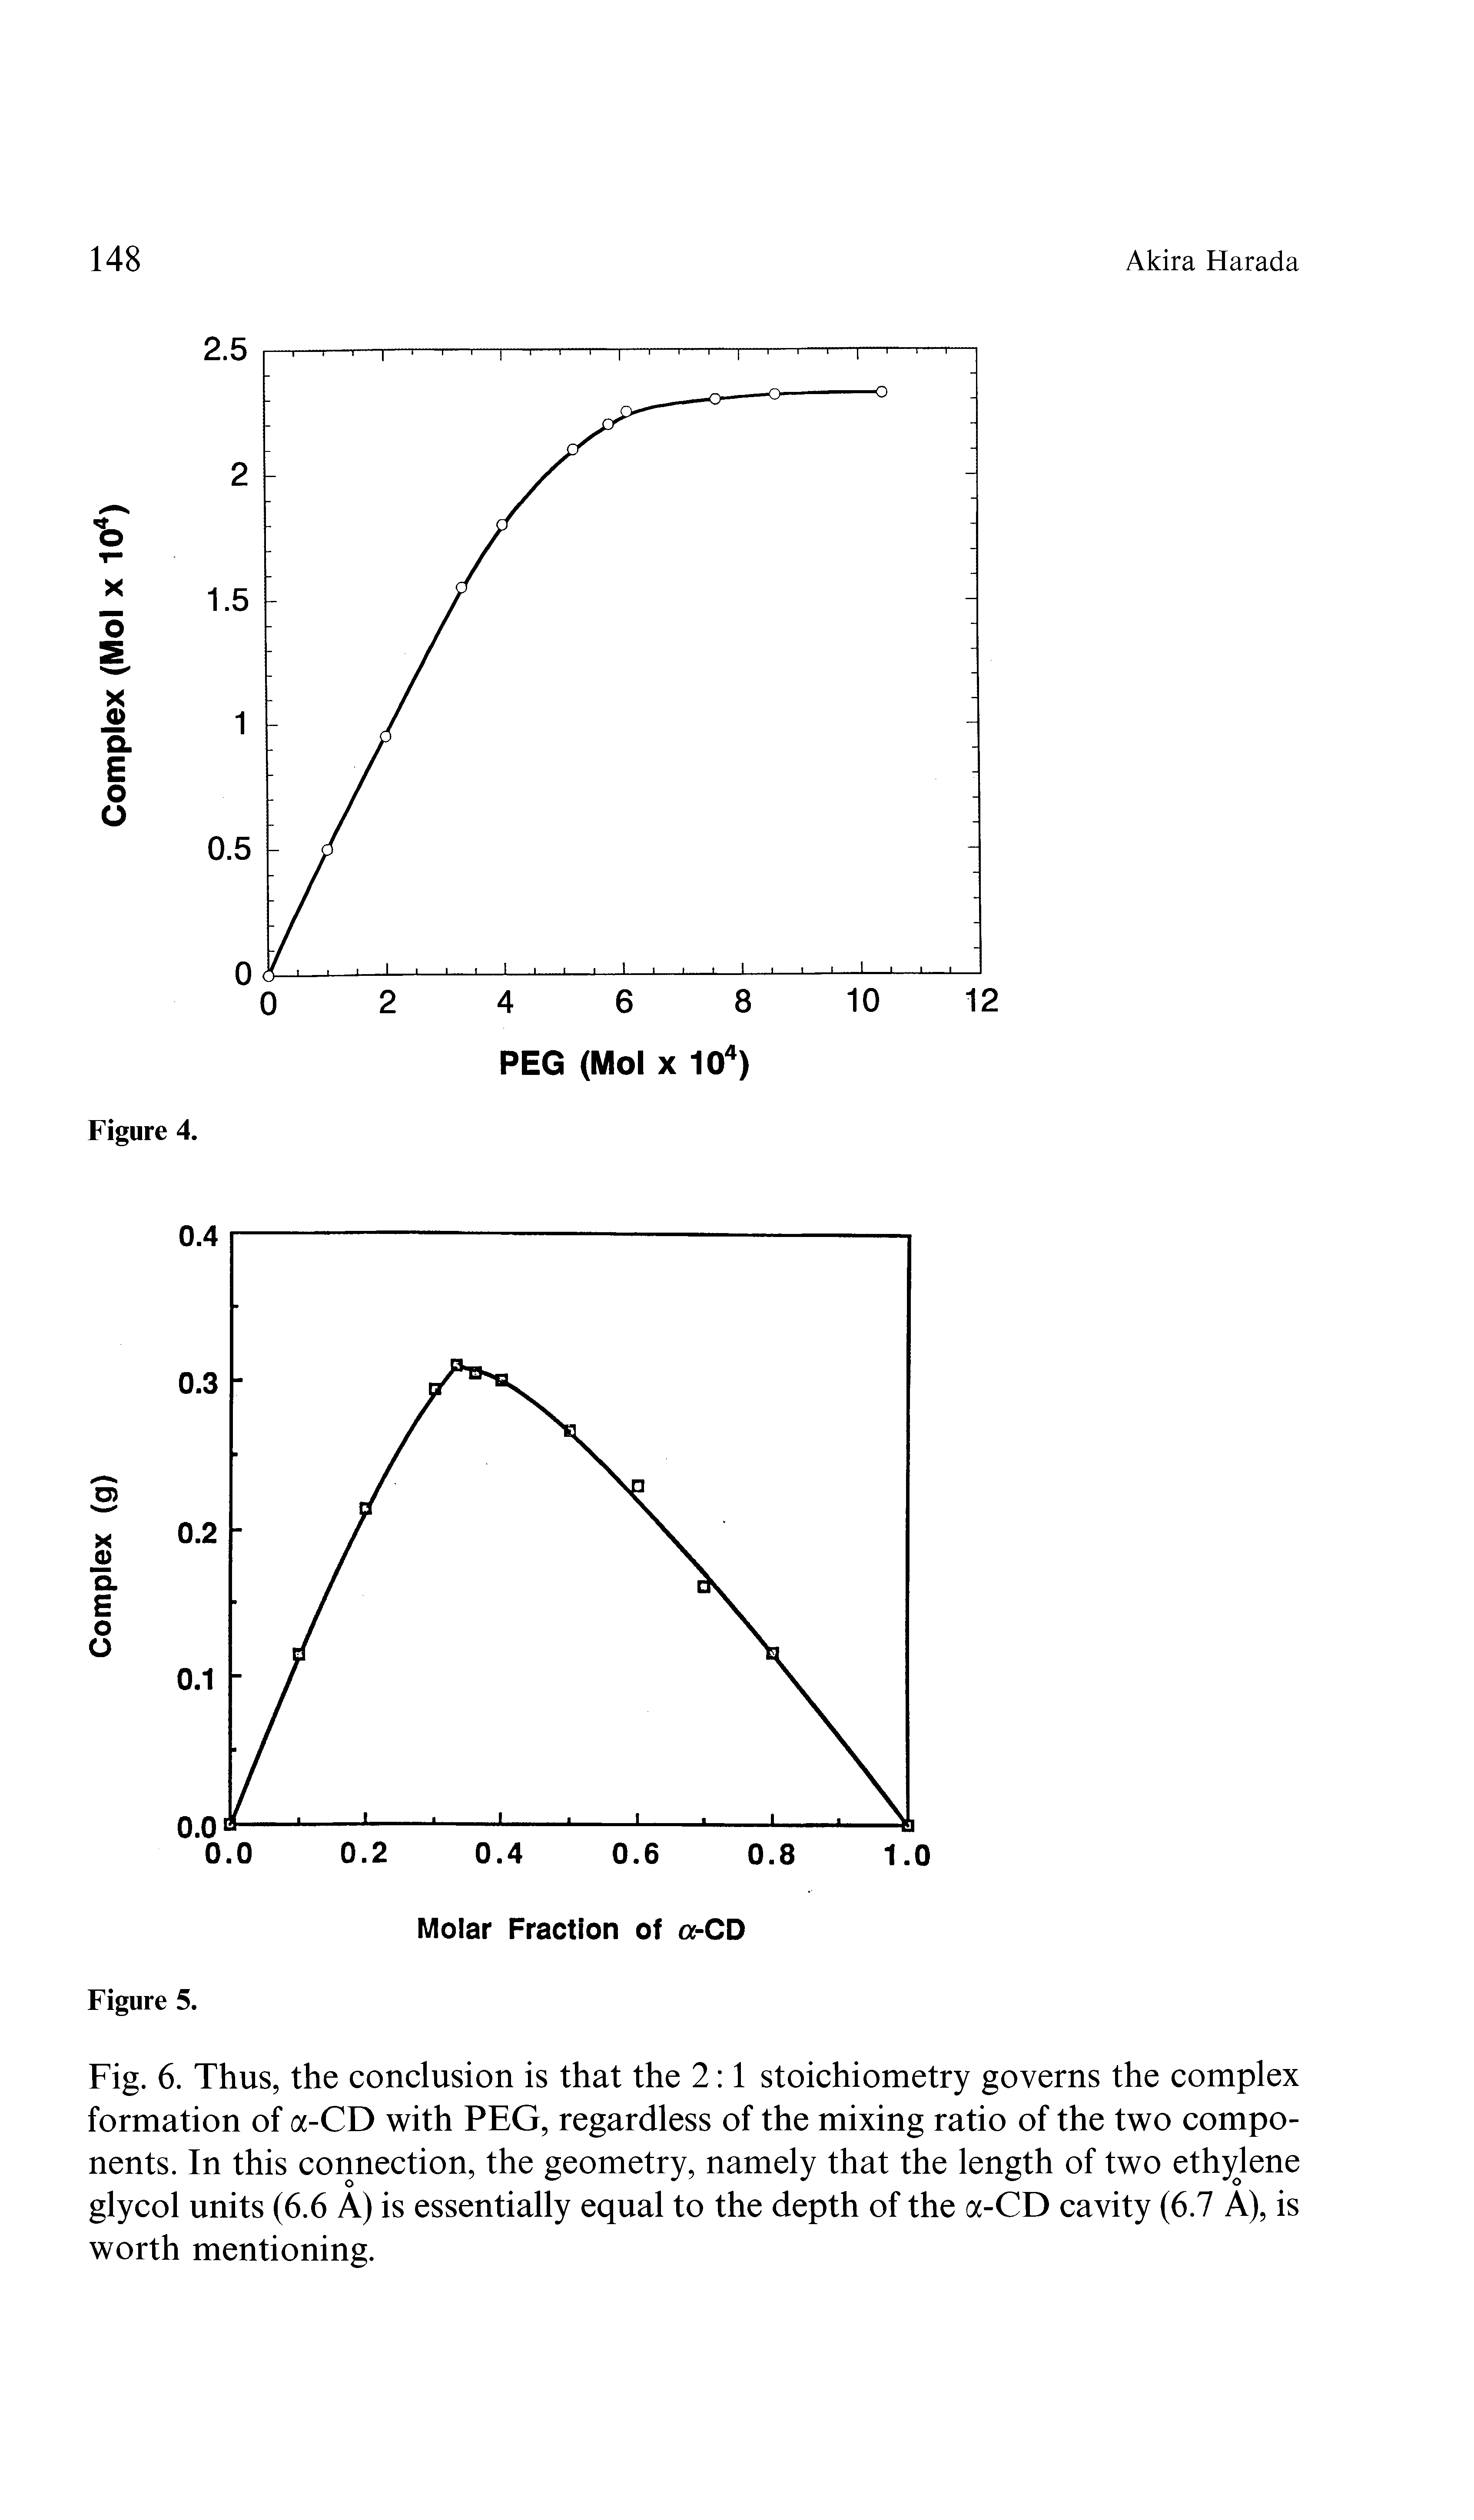 Fig. 6. Thus, the conclusion is that the 2 1 stoichiometry governs the complex formation of a-CD with PEG, regardless of the mixing ratio of the two components. In this connection, the geometry, namely that the length of two ethyjene glycol units (6.6 A) is essentially equal to the depth of the a-CD cavity (6.7 A), is worth mentioning.